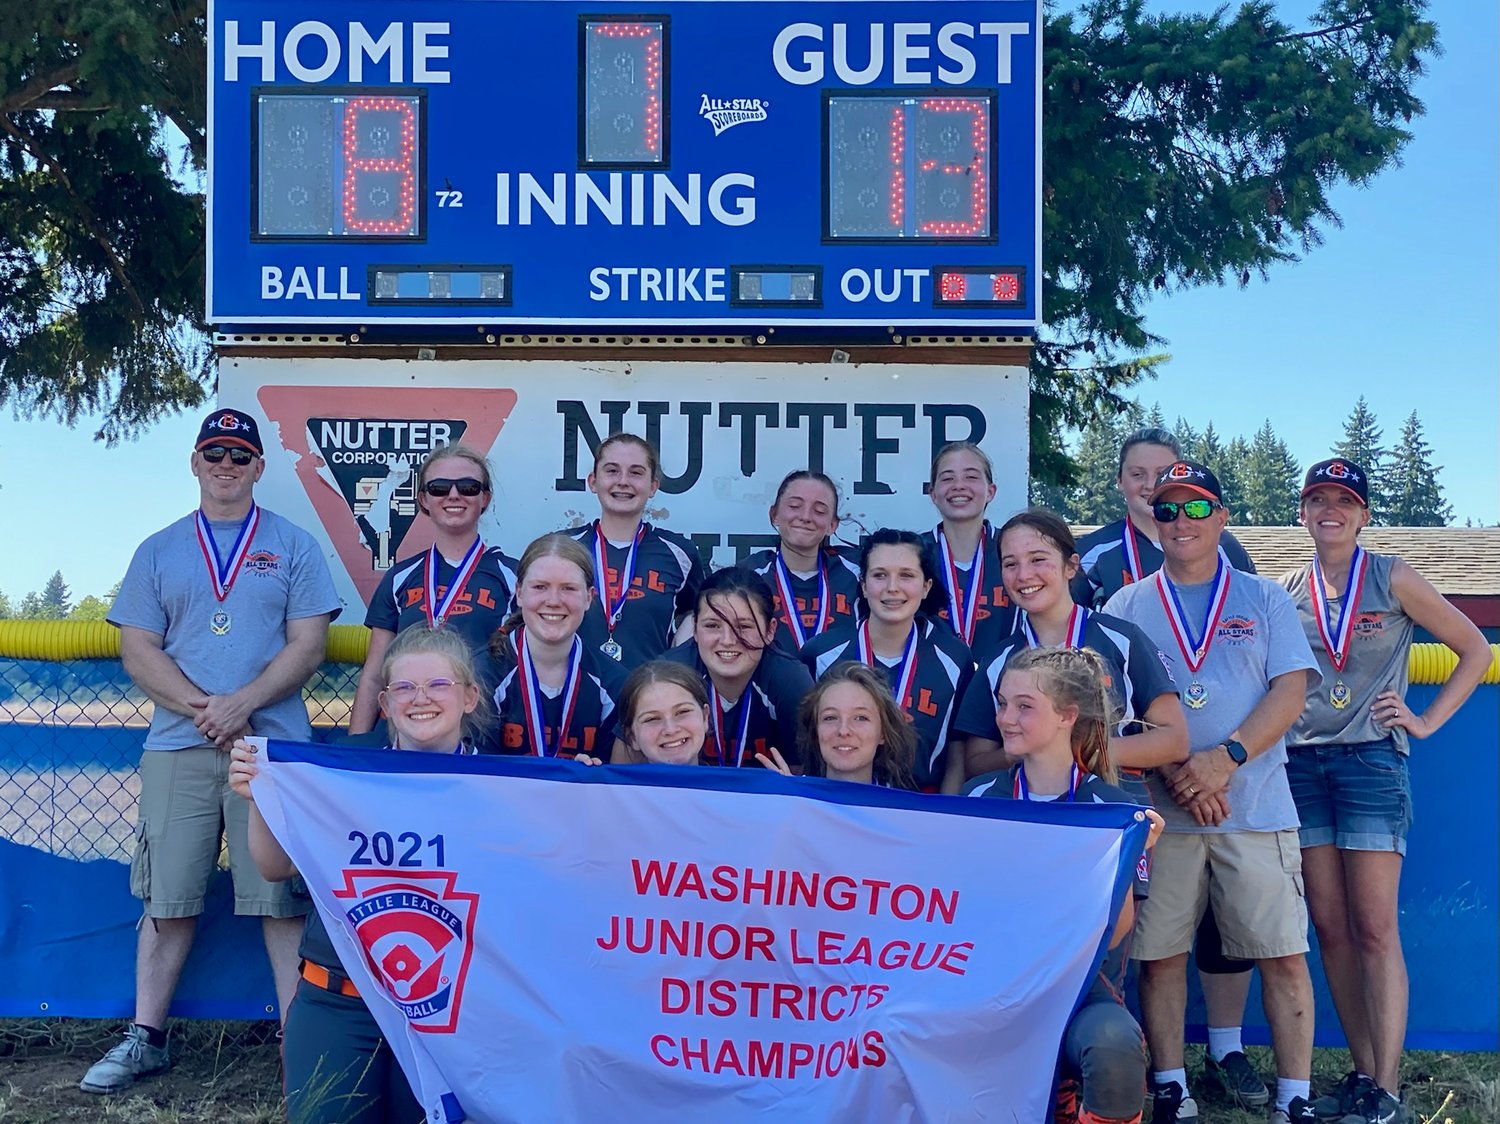 The Battle Ground Little League softball team went undefeated within their division against teams from Salmon Creek, Kalama and Highlands. Eight of the 13 team members averaged .600 or higher for batting during the regular season.